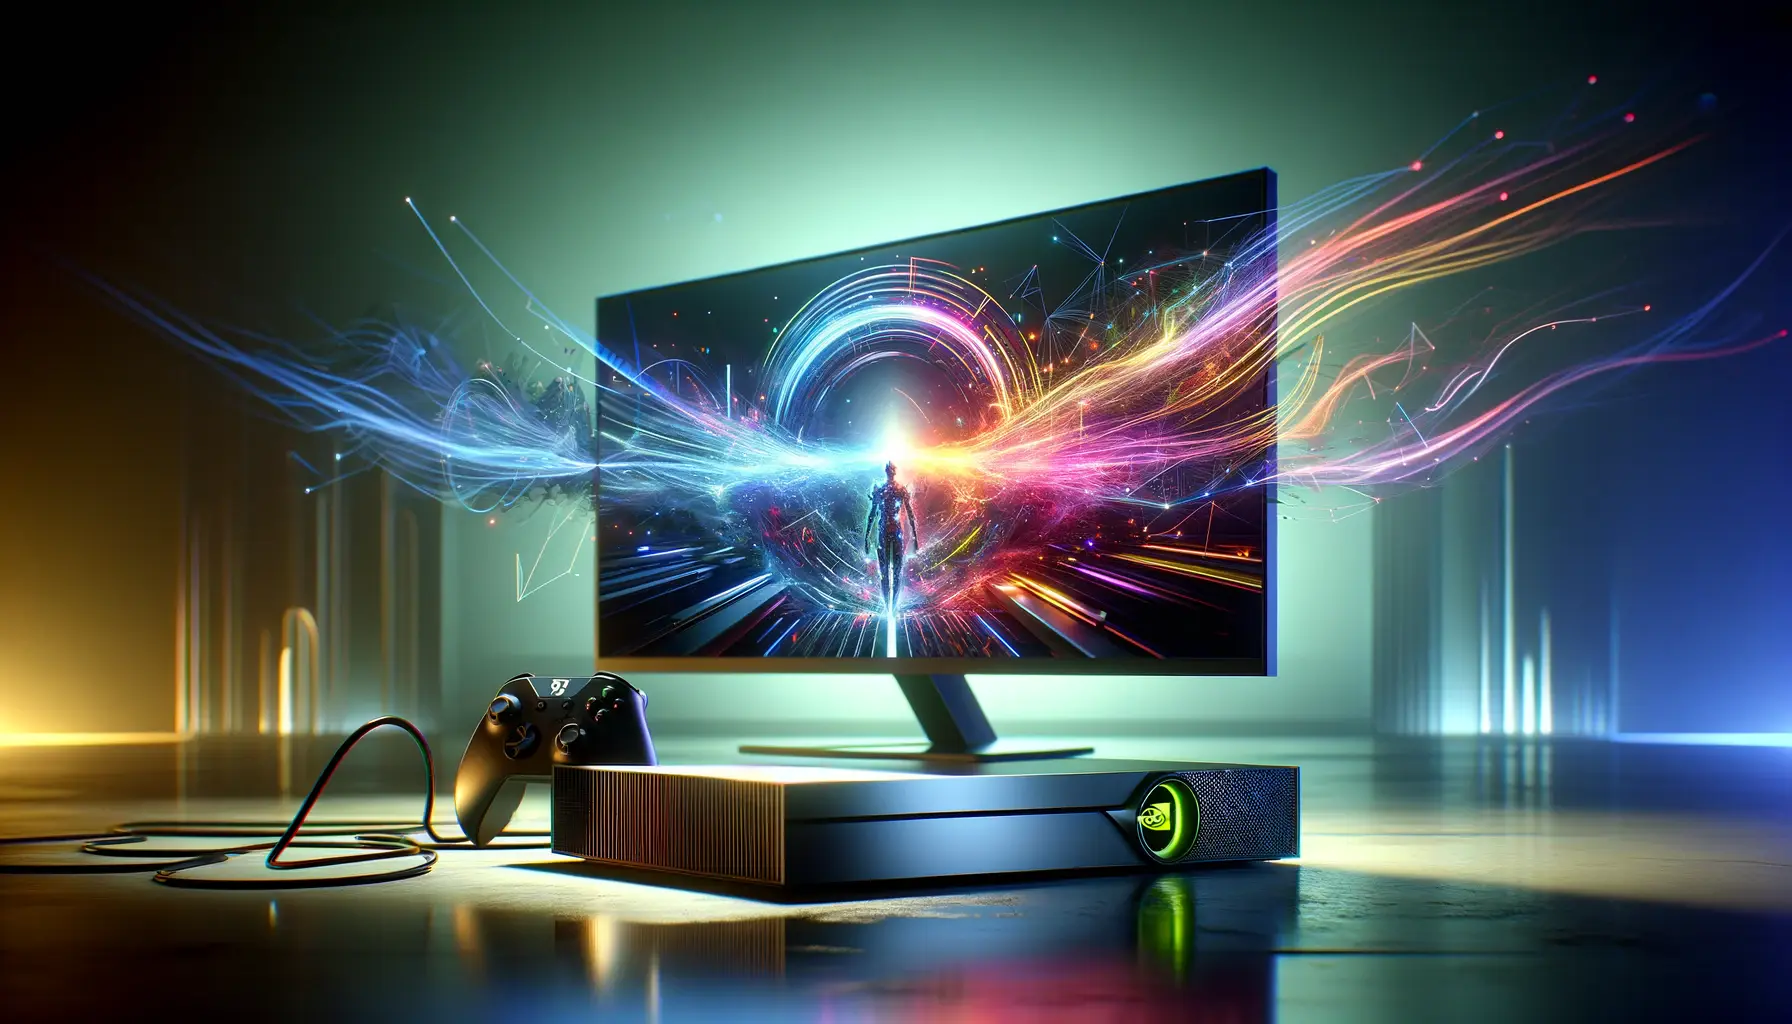 Xbox introduces future of gaming beyond console generations and